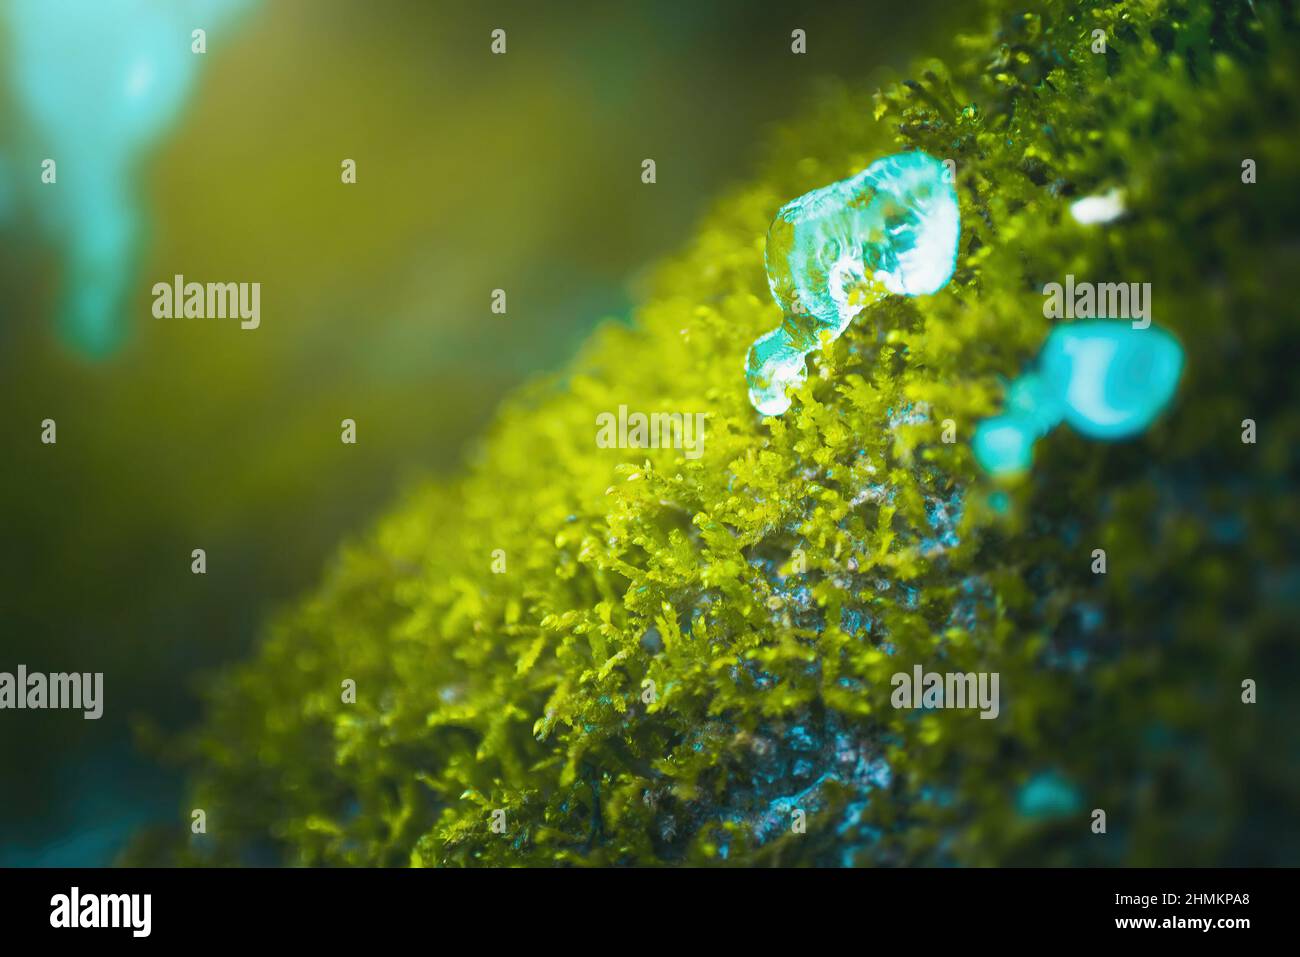 Frozen droplets of water on green moss Stock Photo